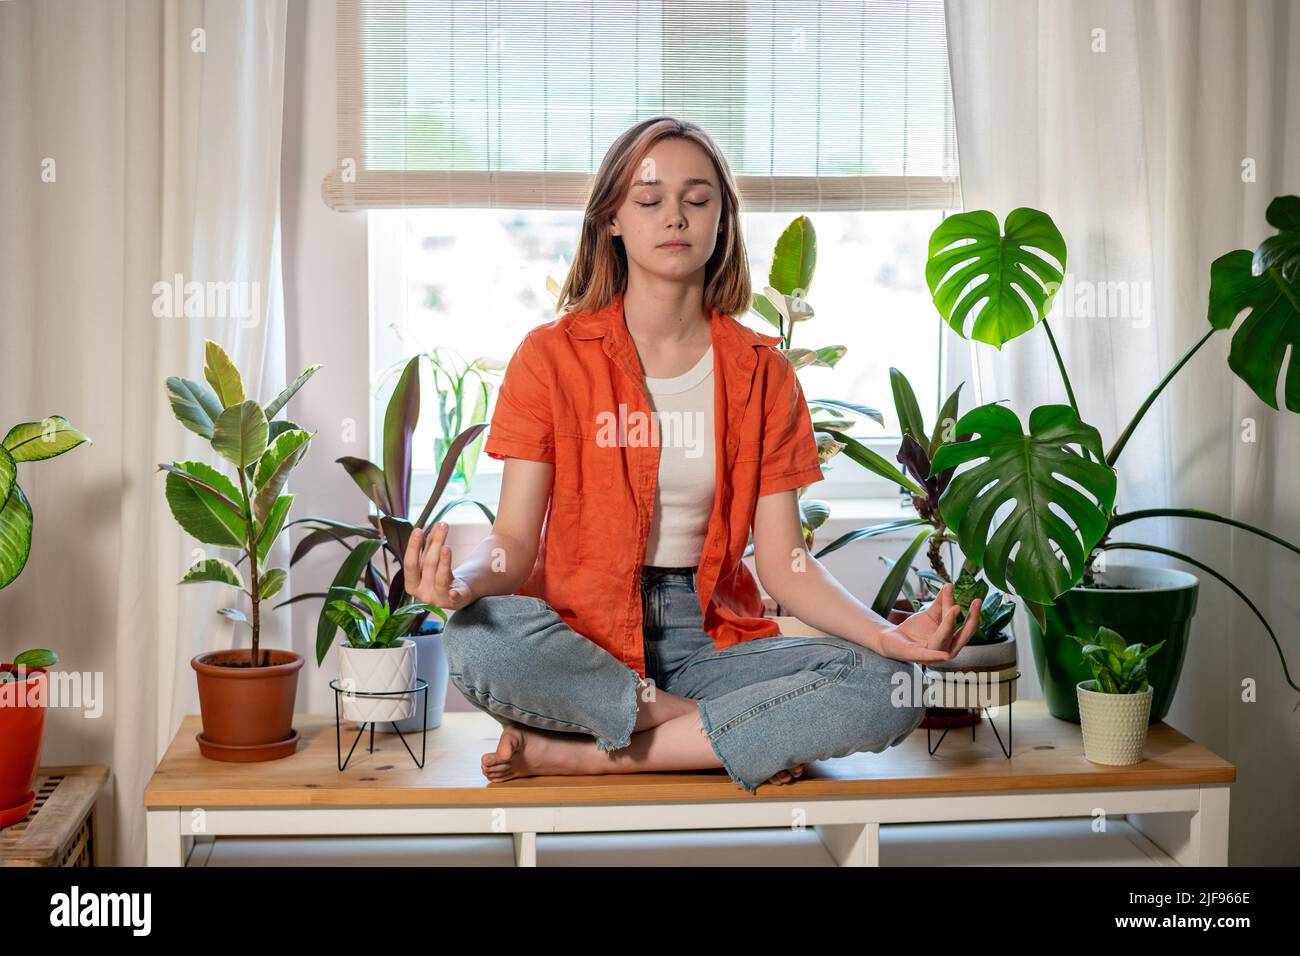 Mindful calm beautiful business woman sit at home office among house plants do yoga exercise, take break, relax eyes closed. Young female freelancer meditate at workplace in lotus position, feel zen, no stress, peace of mind concept. Stock Photo